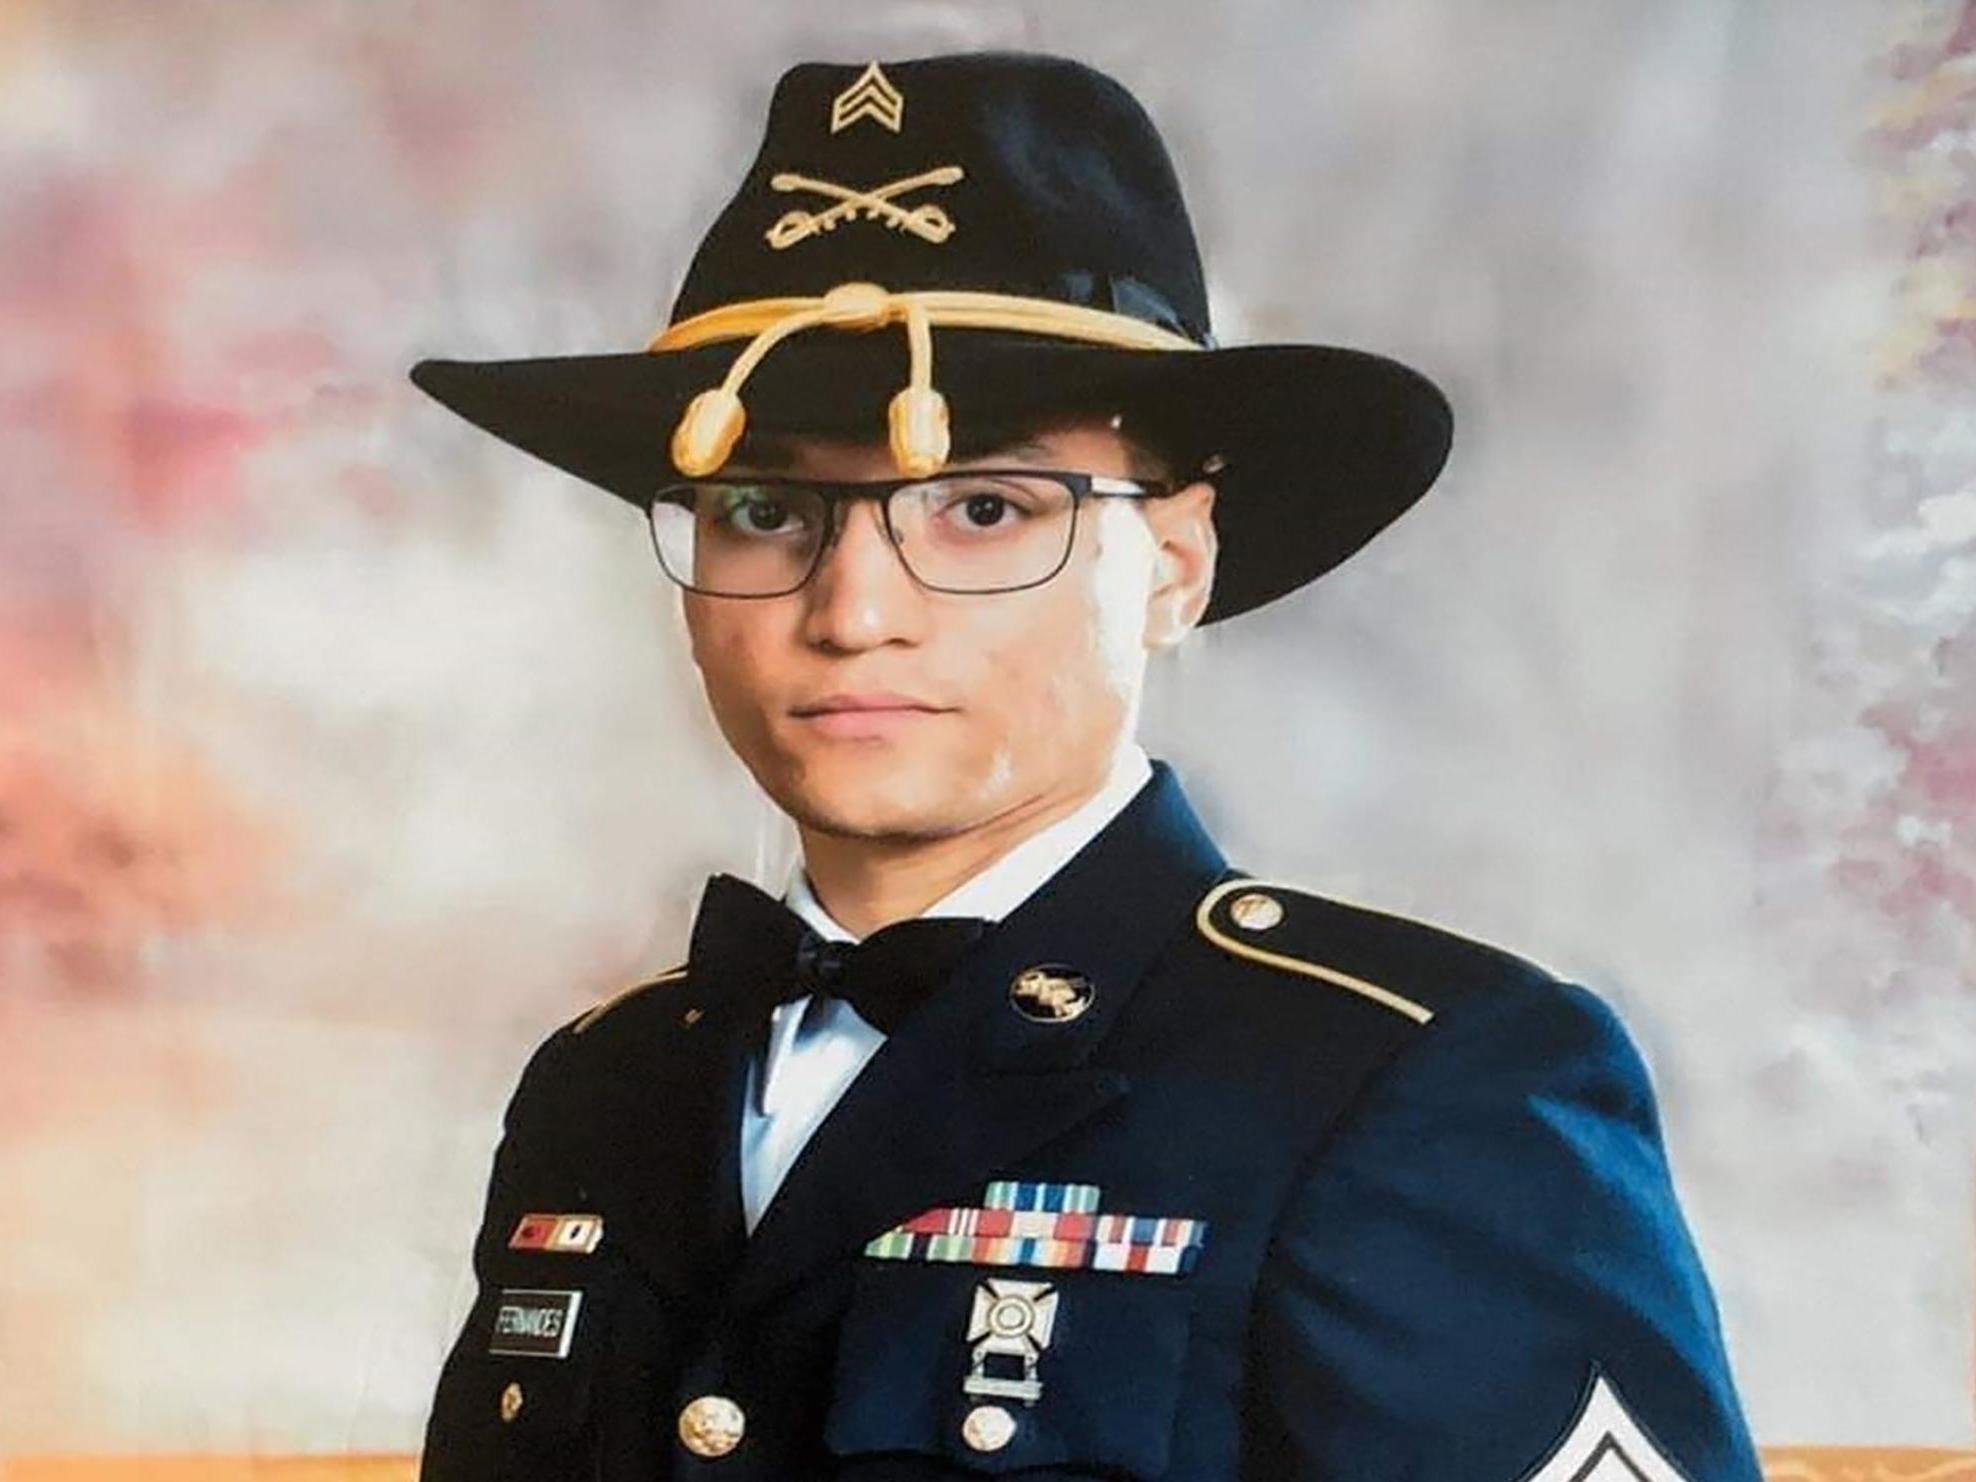 Police say a body found near Fort Hood, Texas, is likely that of Sgt Elder Fernandes.